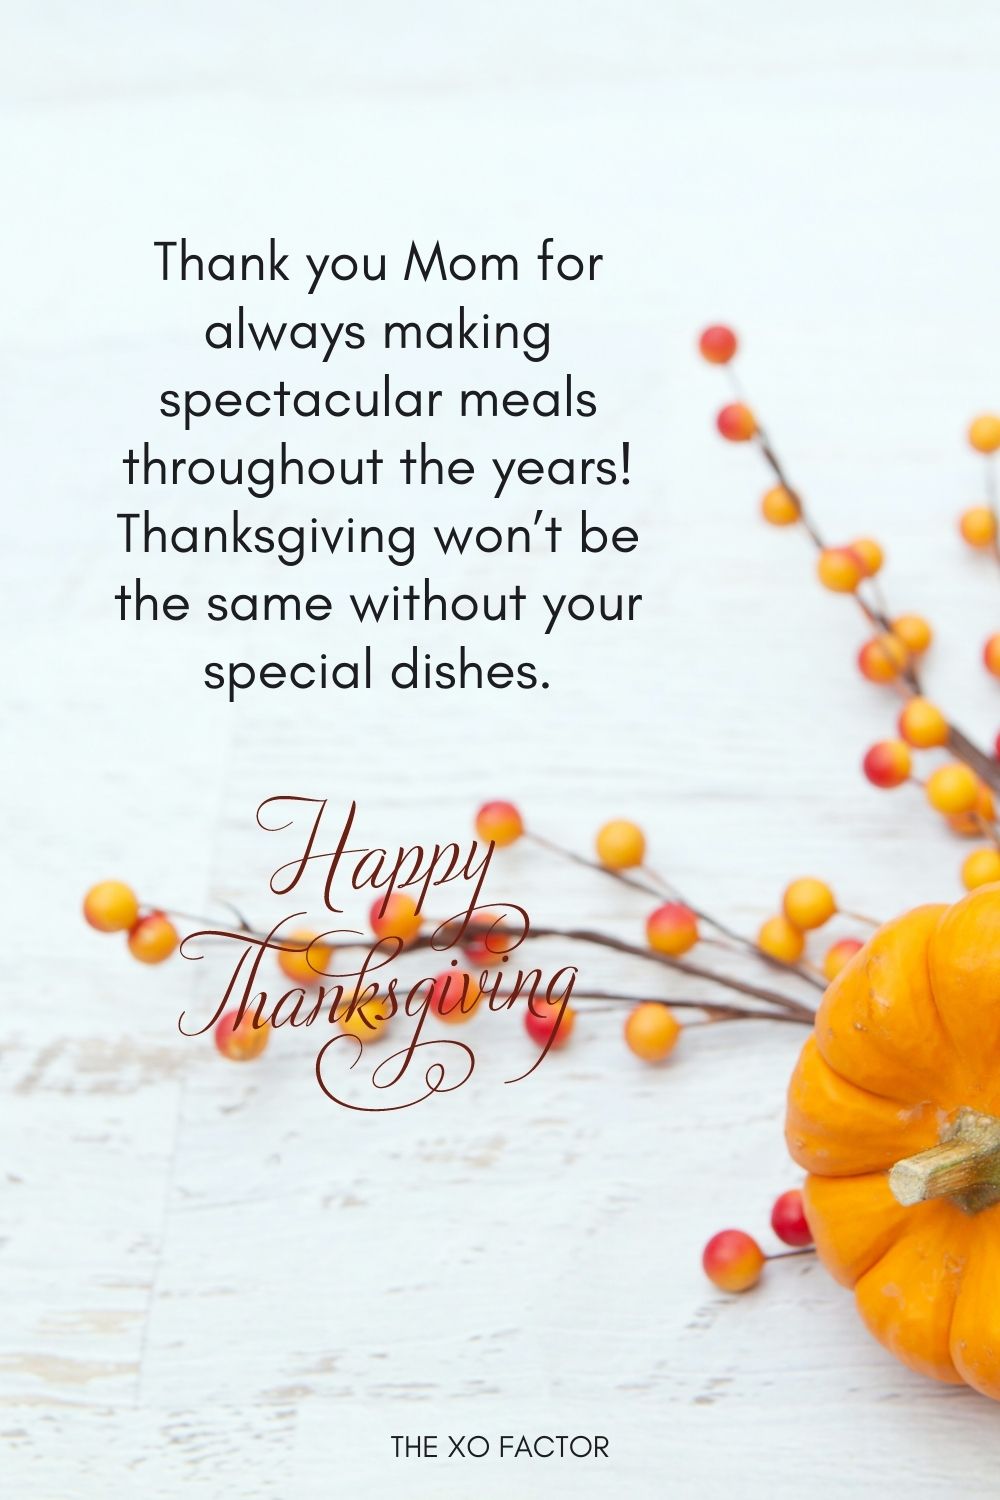 Thank you Mom for always making spectacular meals throughout the years! Thanksgiving won’t be the same without your special dishes.